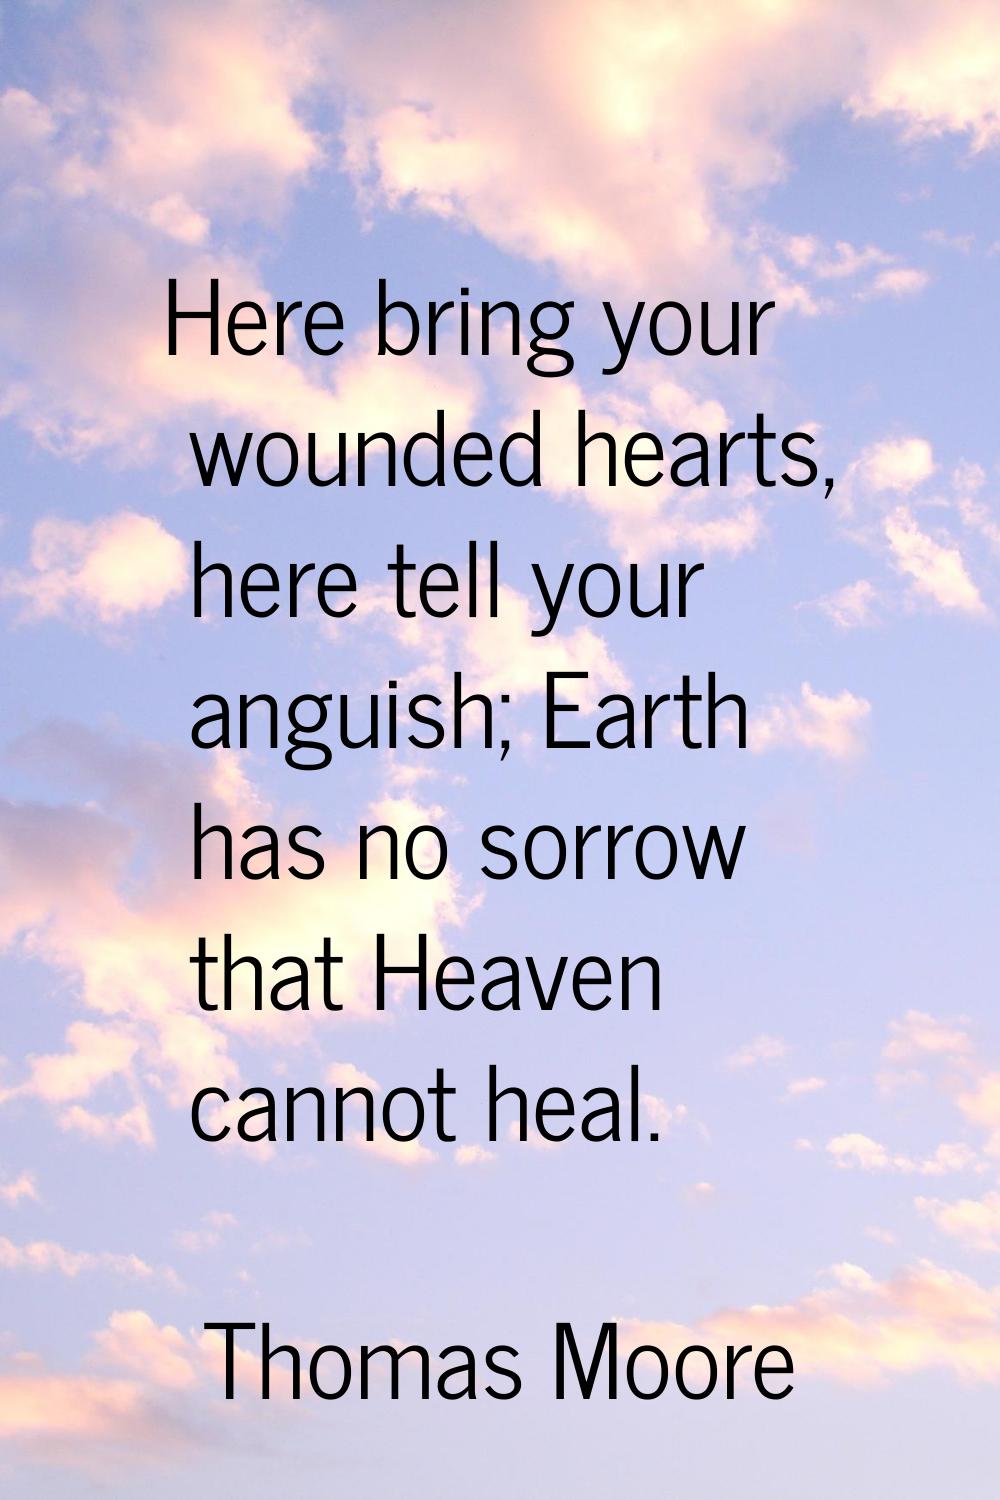 Here bring your wounded hearts, here tell your anguish; Earth has no sorrow that Heaven cannot heal